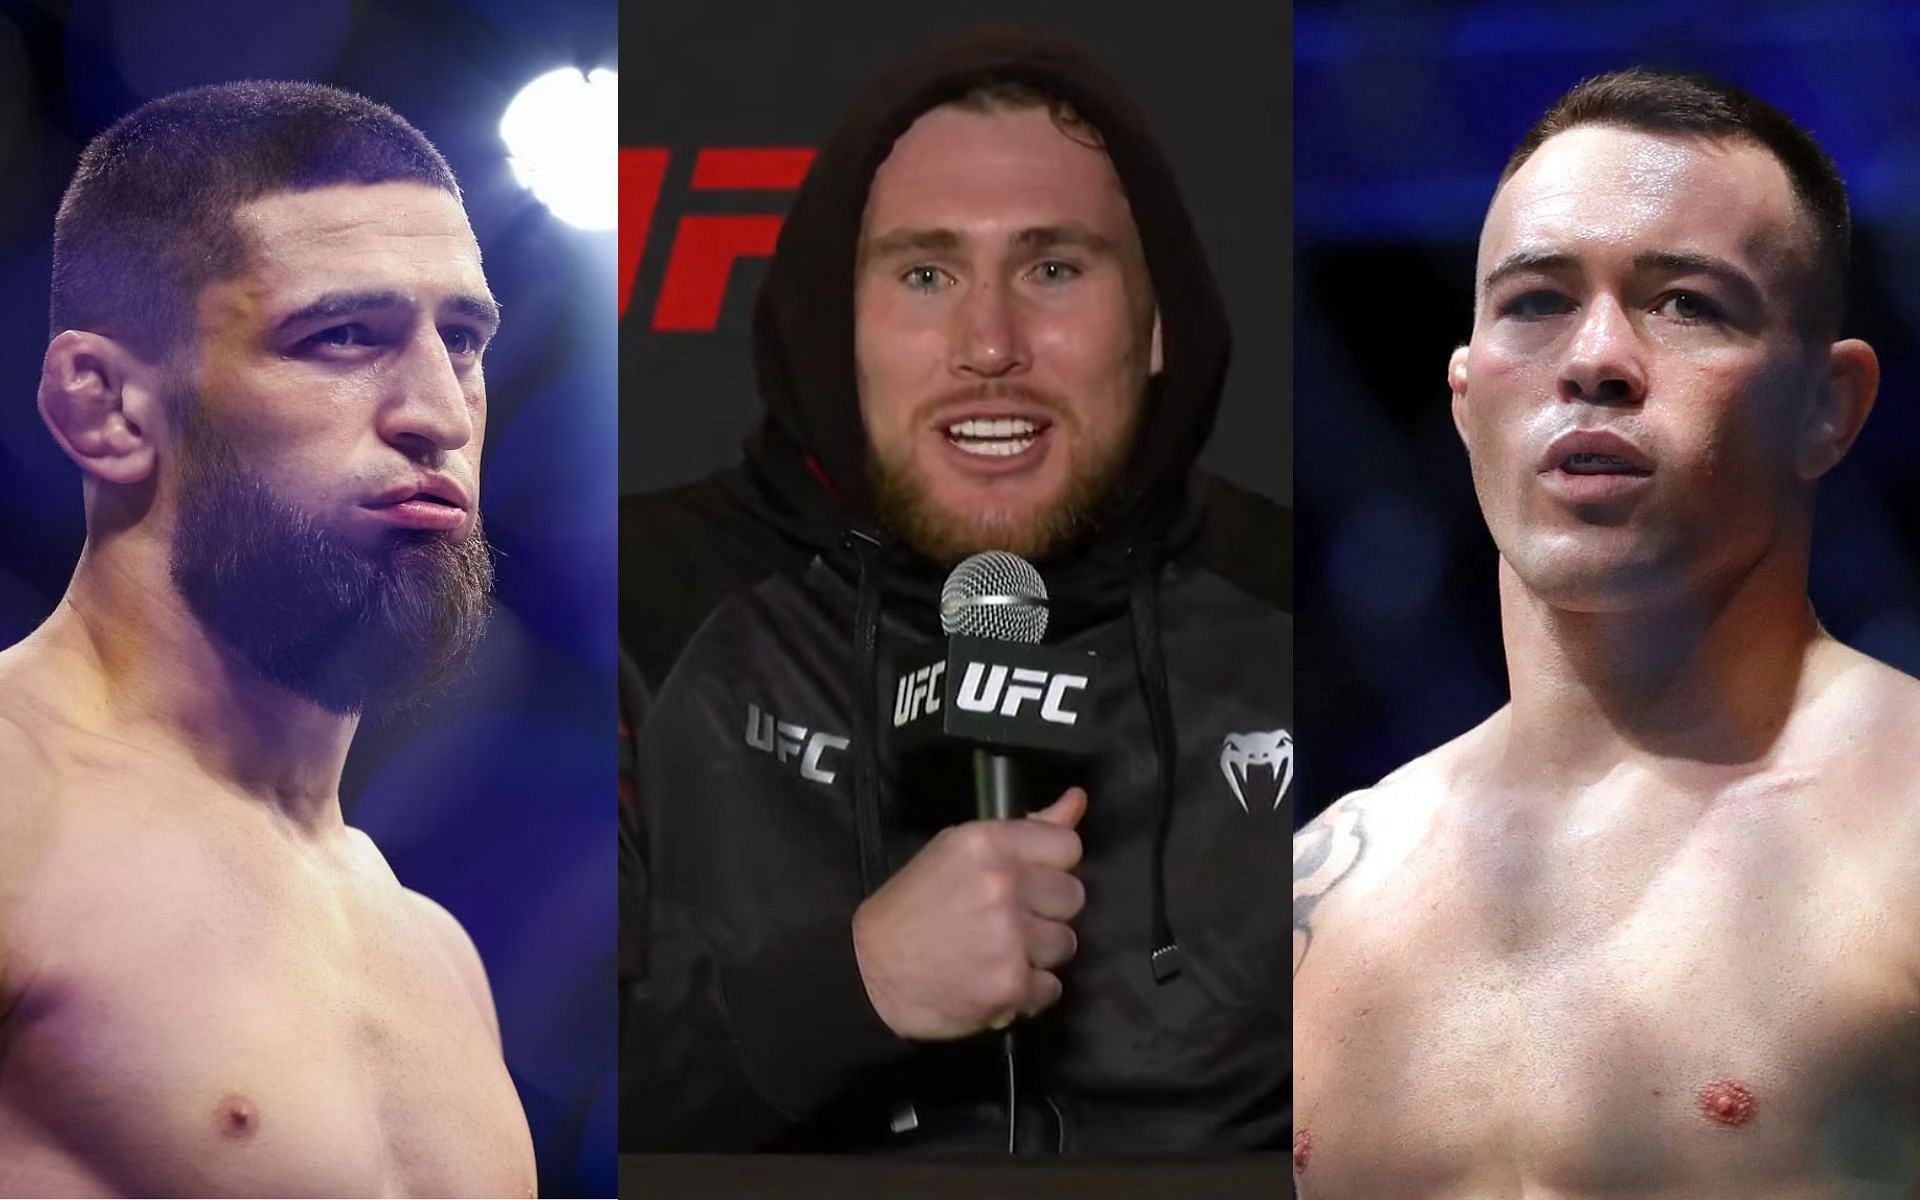 Khamzat Chimaev (left), Darren Till during pre-fight press conference for UFC 282 (middle)[Image courtesy: @ufc on YouTube] and Colby Covington (right)